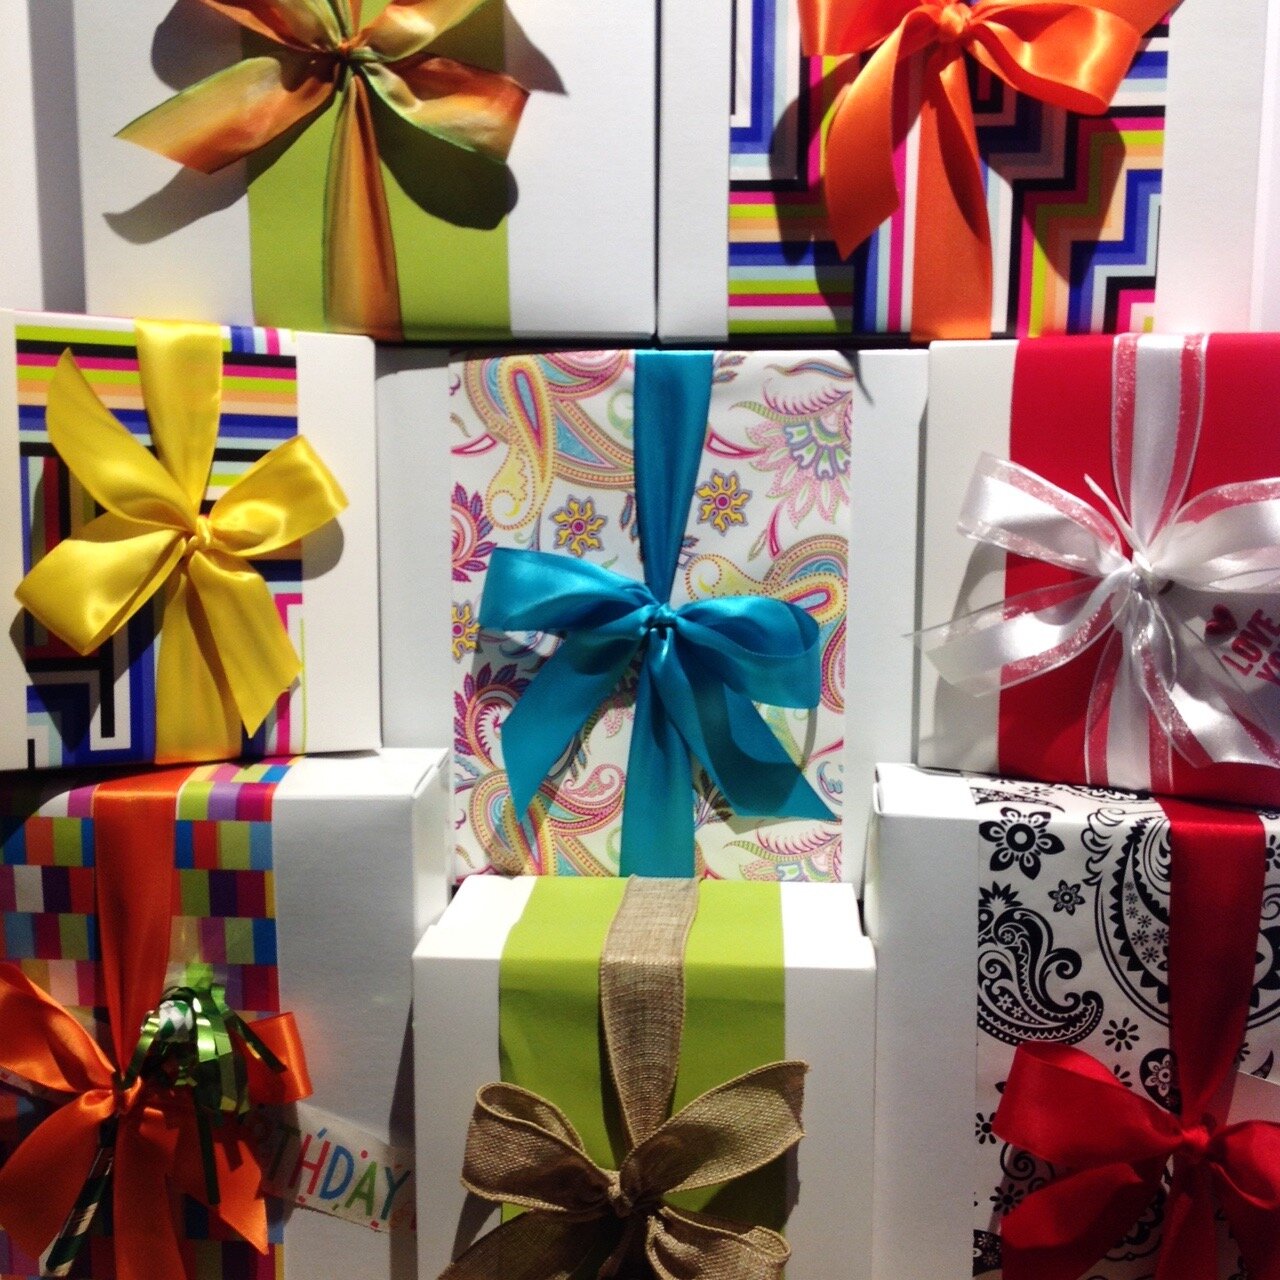 Custom Gift Boxes Online - Send as Care Packages, Covid Get Well Gifts and More